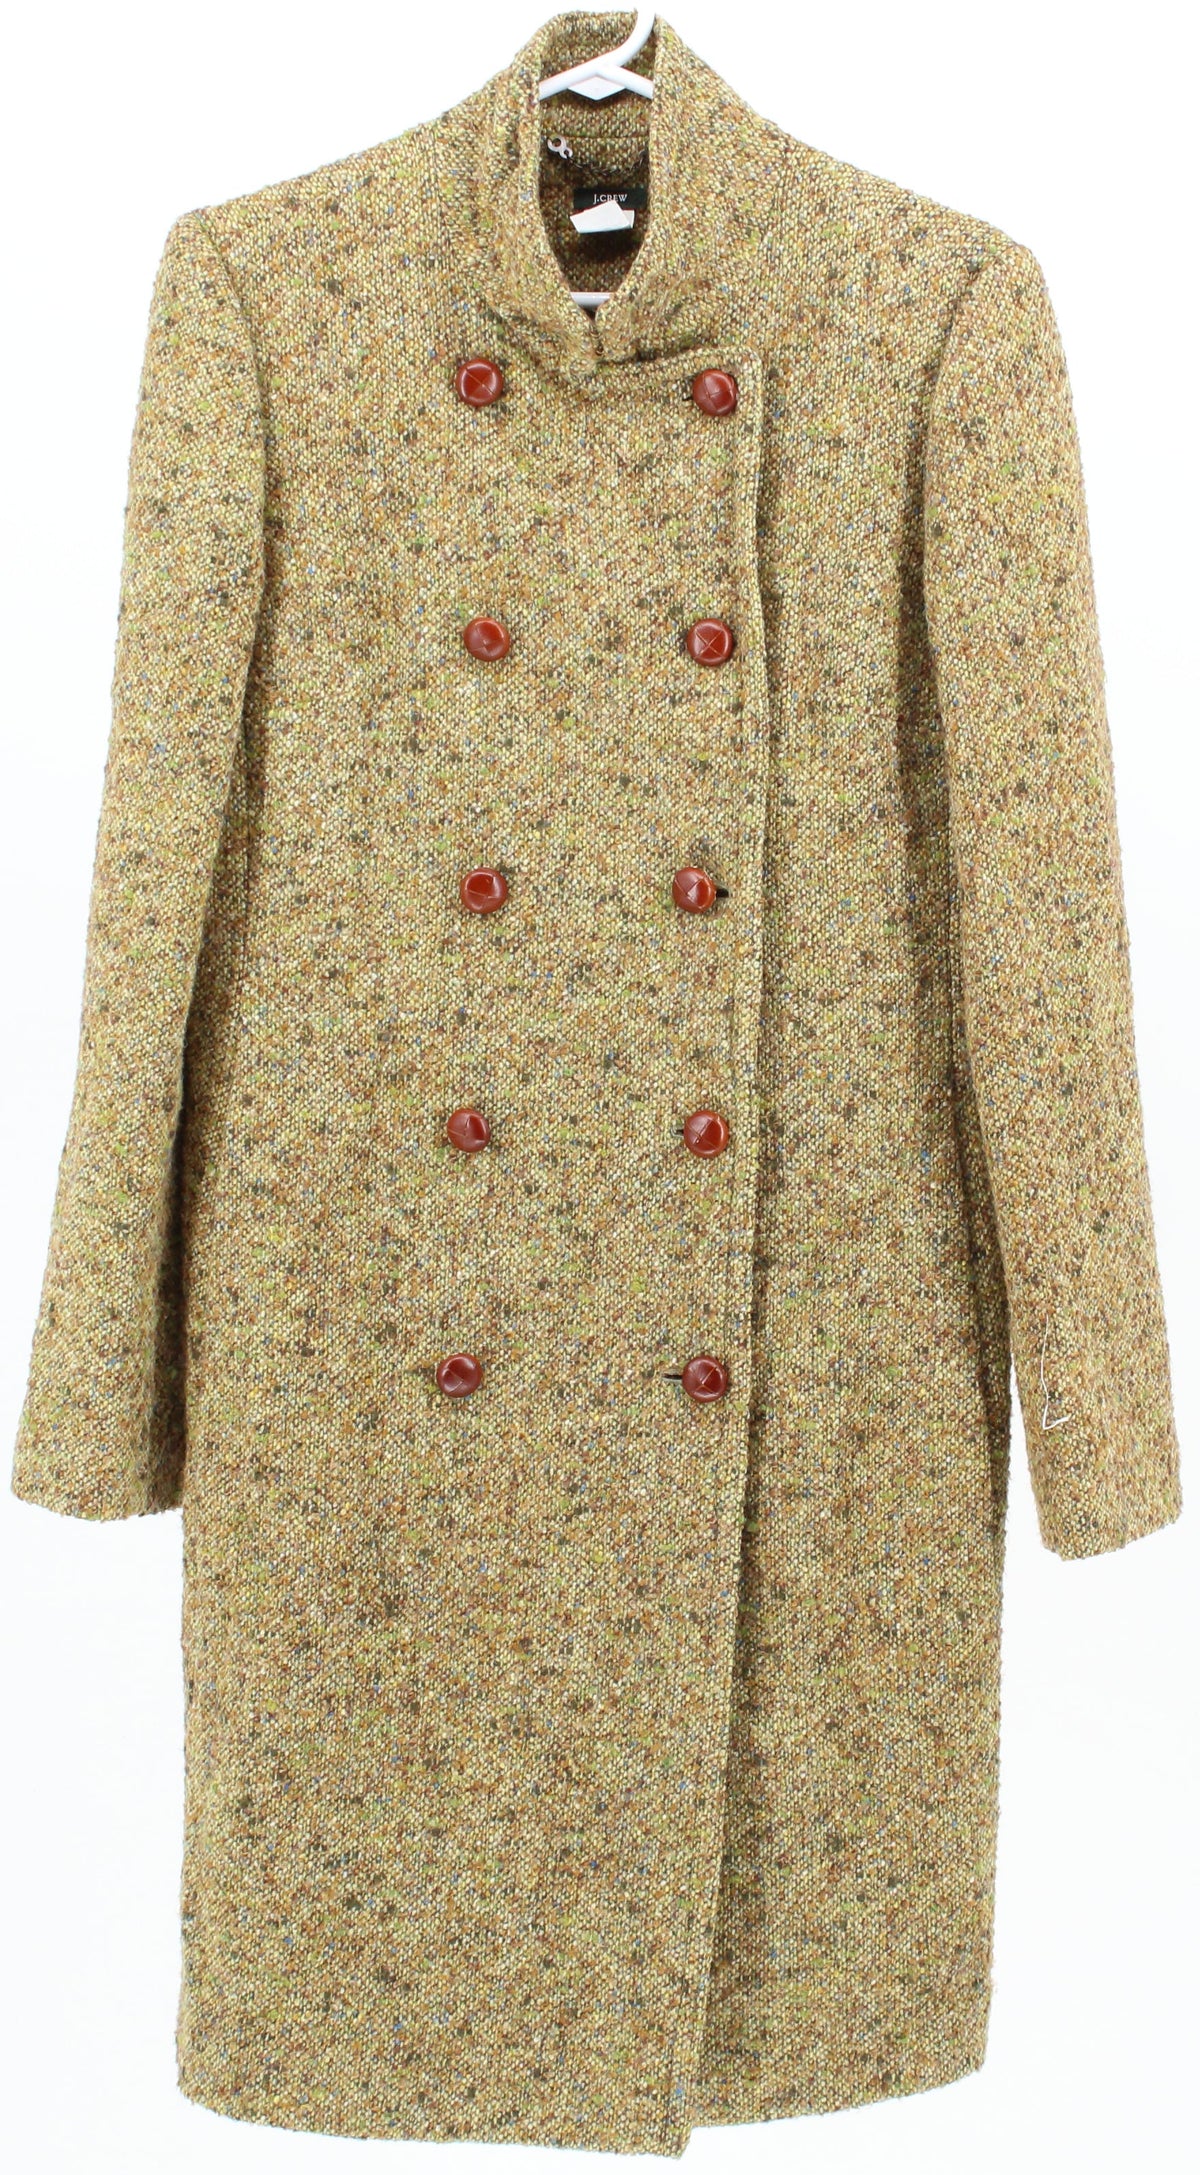 J Crew Green Wool Coat With Brown Buttons